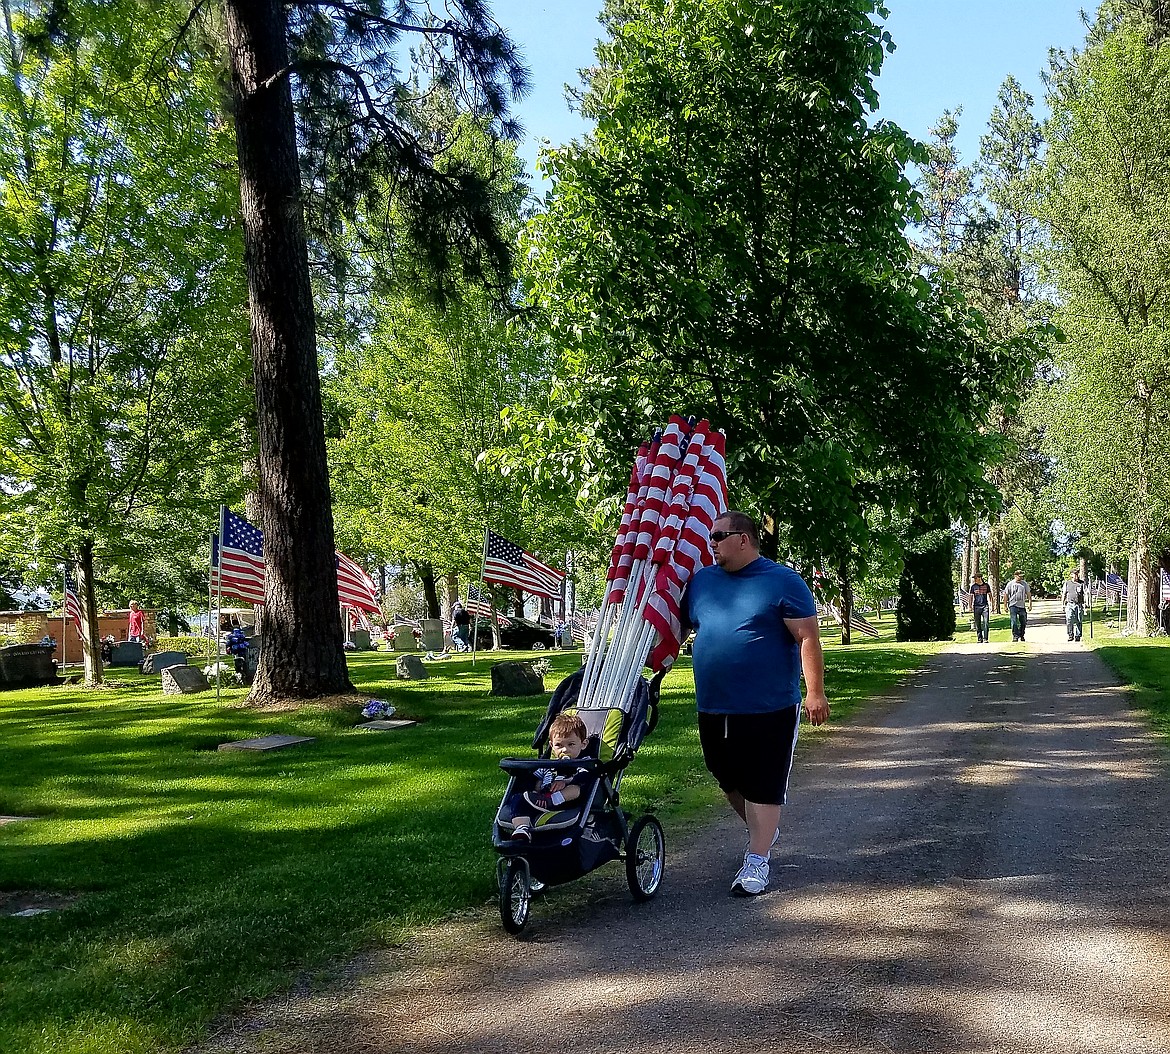 Rodney Burtis II and his young son, Schuyler, carry flags to place on veterans' graves at Evergreen Cemetery in Post Falls on Saturday. Over 600 flags were placed by volunteers in preparation for American Legion Post 143's Monday Memorial Day ceremony at 10 a.m.
(Photo by KERRI THORESON)